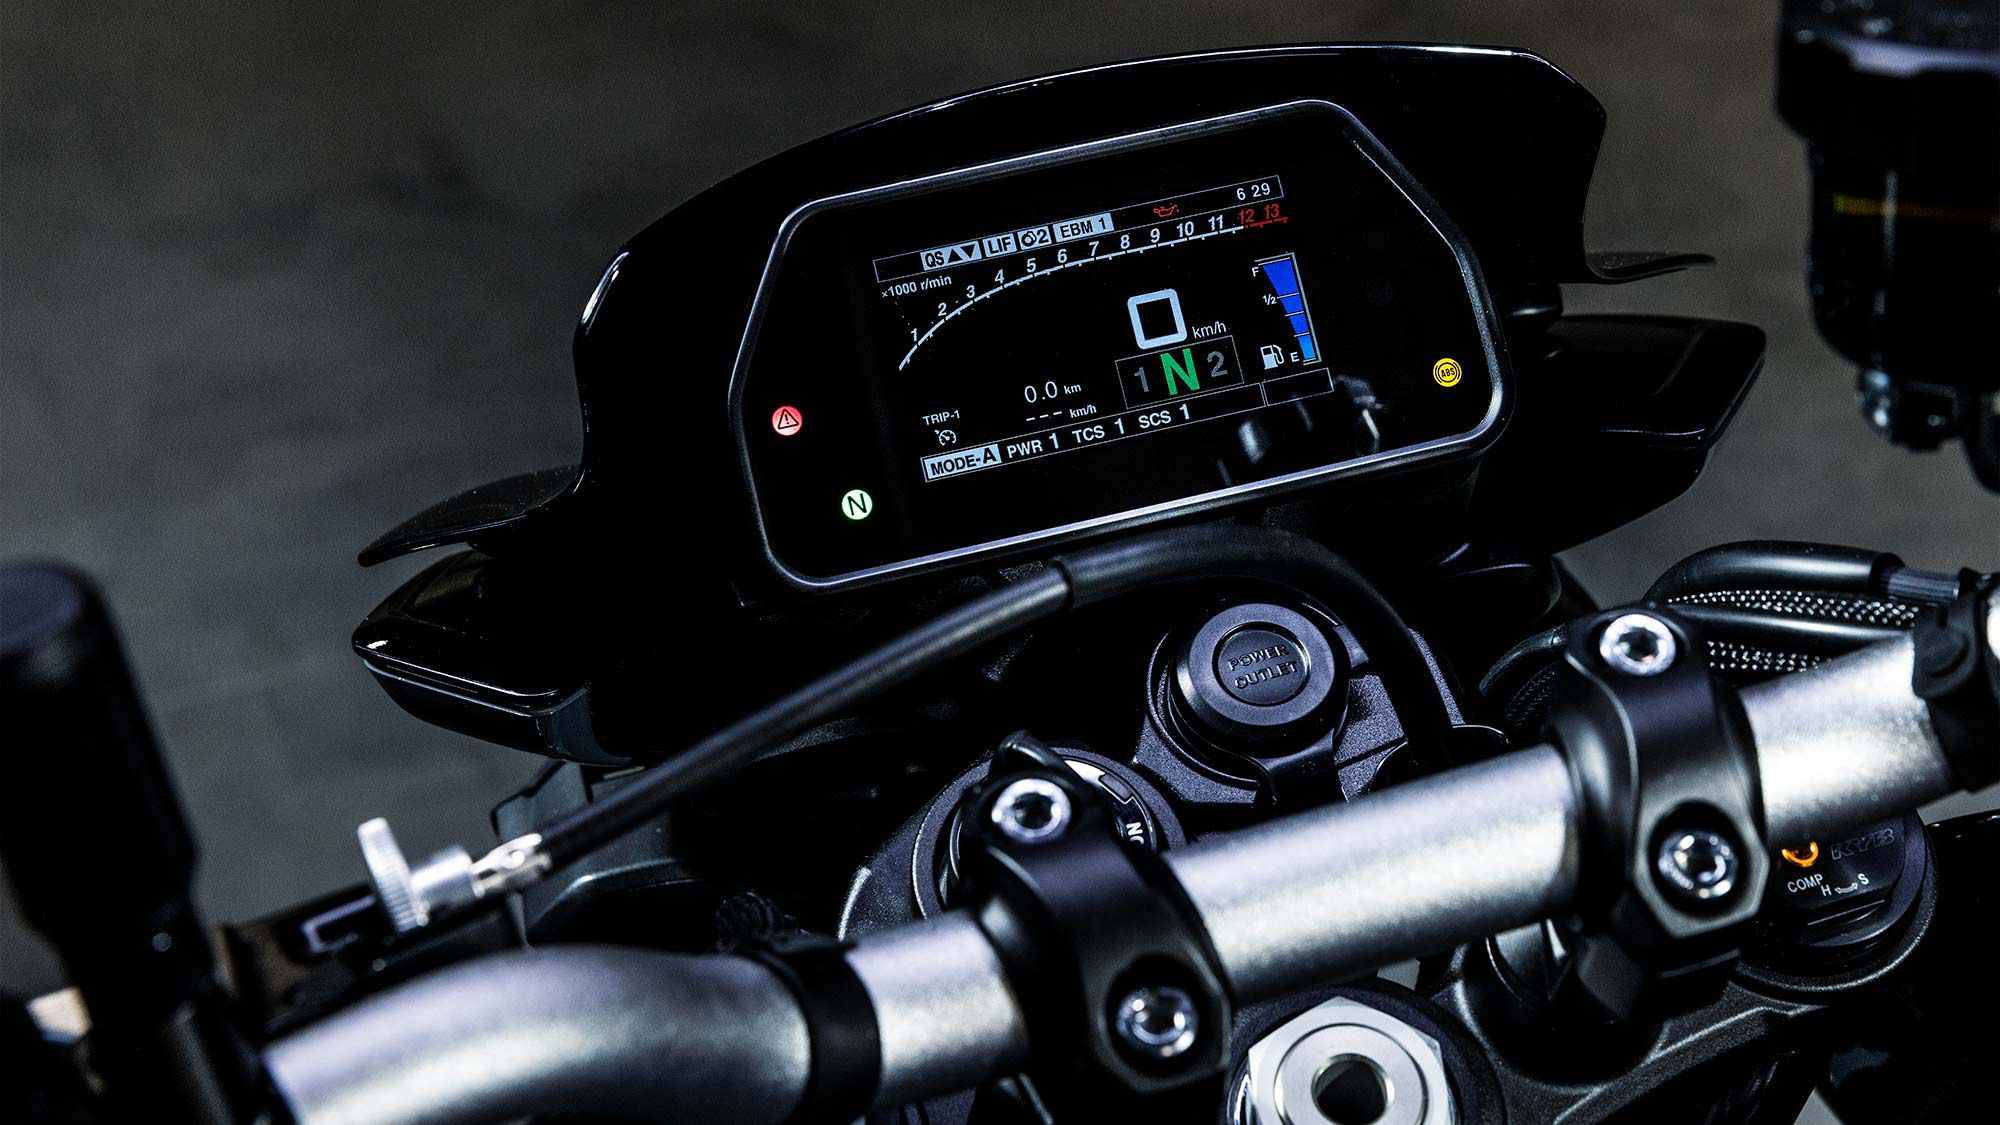 Four riding modes, Traction Control System (TCS), Side Control System (SCS), Lift Control System (LIF), and cornering ABS, up and down quickshift, plus cruise control and a speed limiter all come as standard.